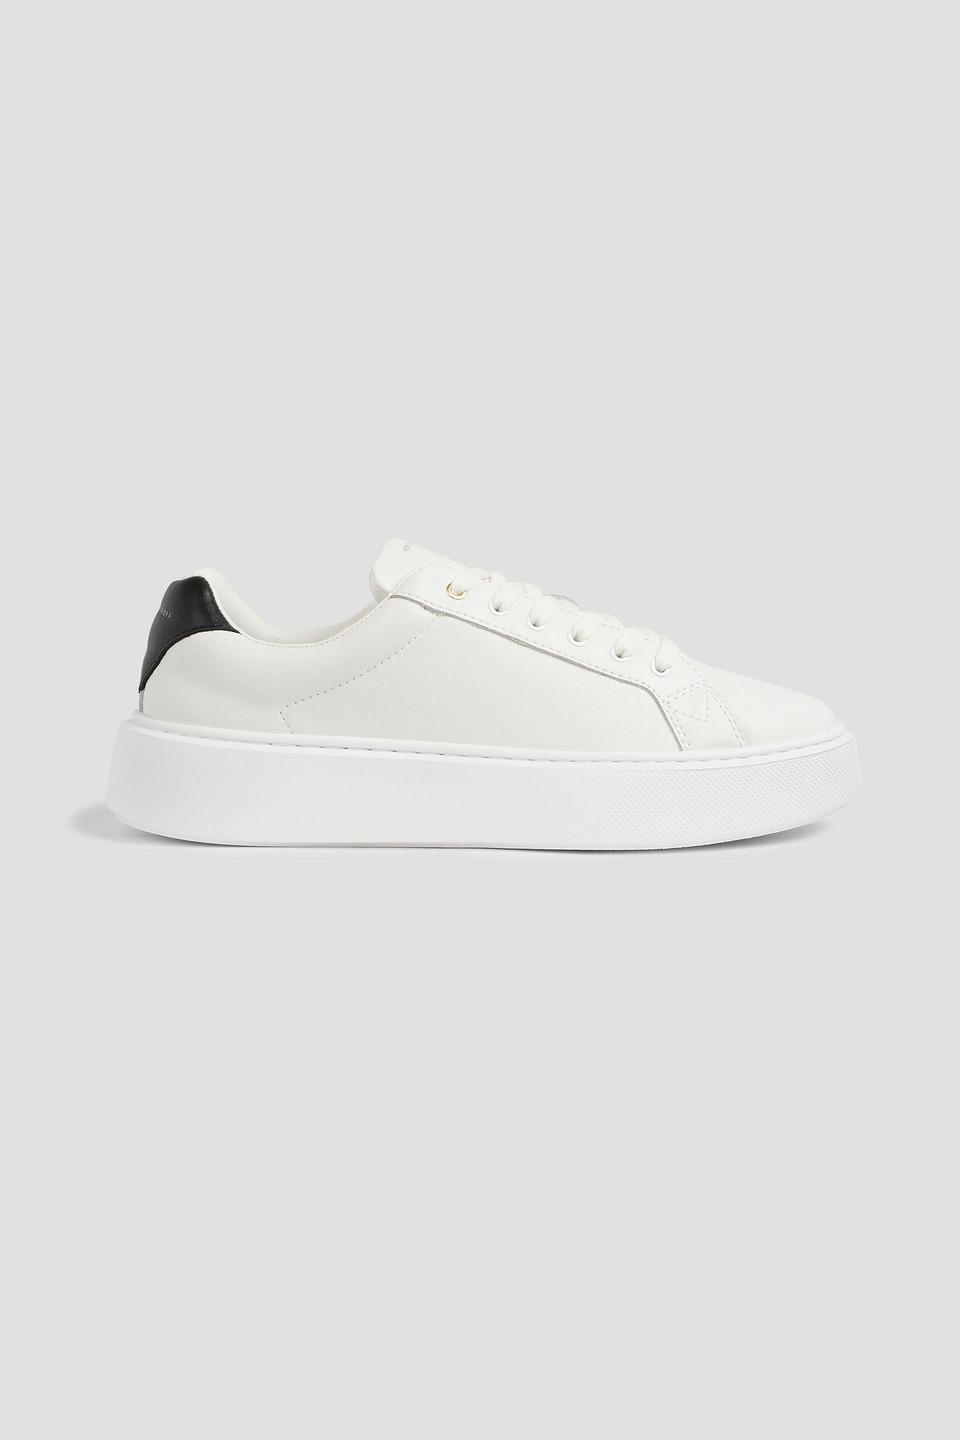 Rebecca Minkoff Alexi Leather Sneakers in White | Lyst